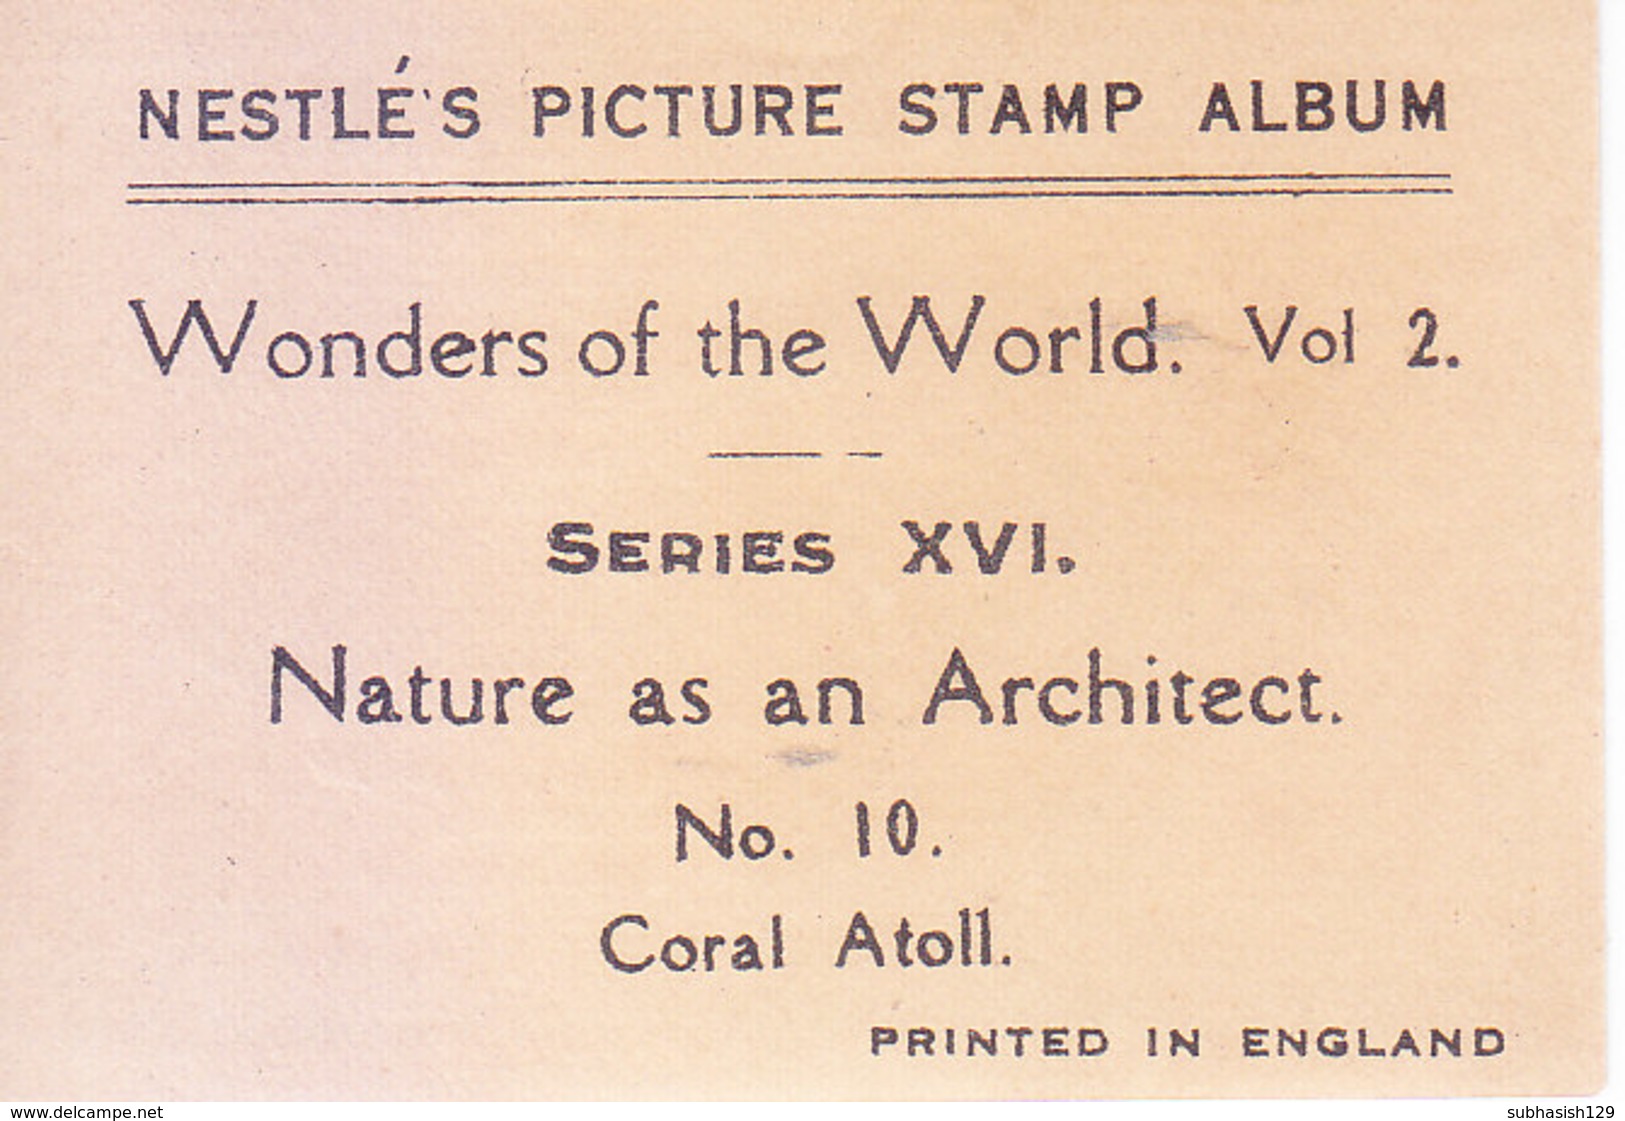 SWITZERLAND - NESTLE 'S PICTURE STAMP / CARD / LABEL - NATURE AS AN ARCHITECT - Advertising